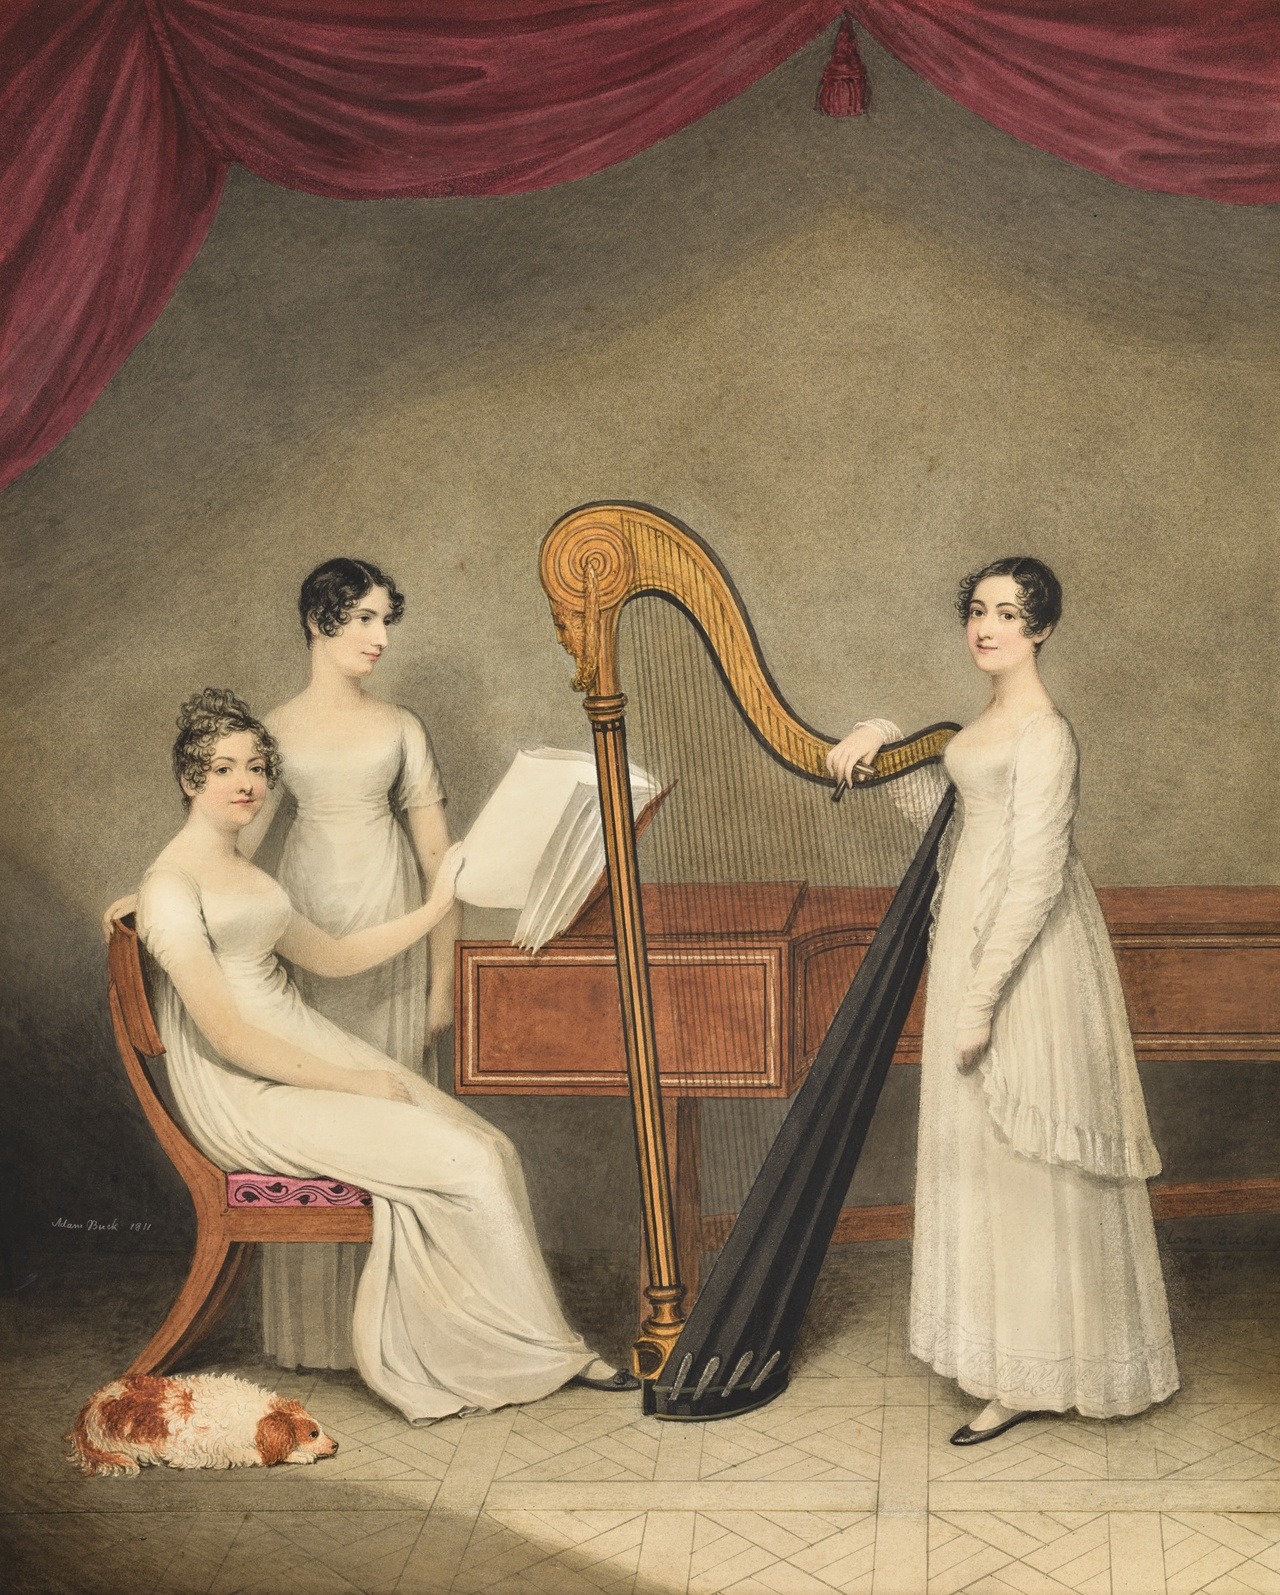 Adam Buck (1759-1833), â€˜Three Young Ladies in an Interiorâ€™, watercolour and pencil on paper, c.1811, British, for sale est. 3,000-5,000 GBP in Sothebyâ€™s Old Master & British works on paper, July 2019